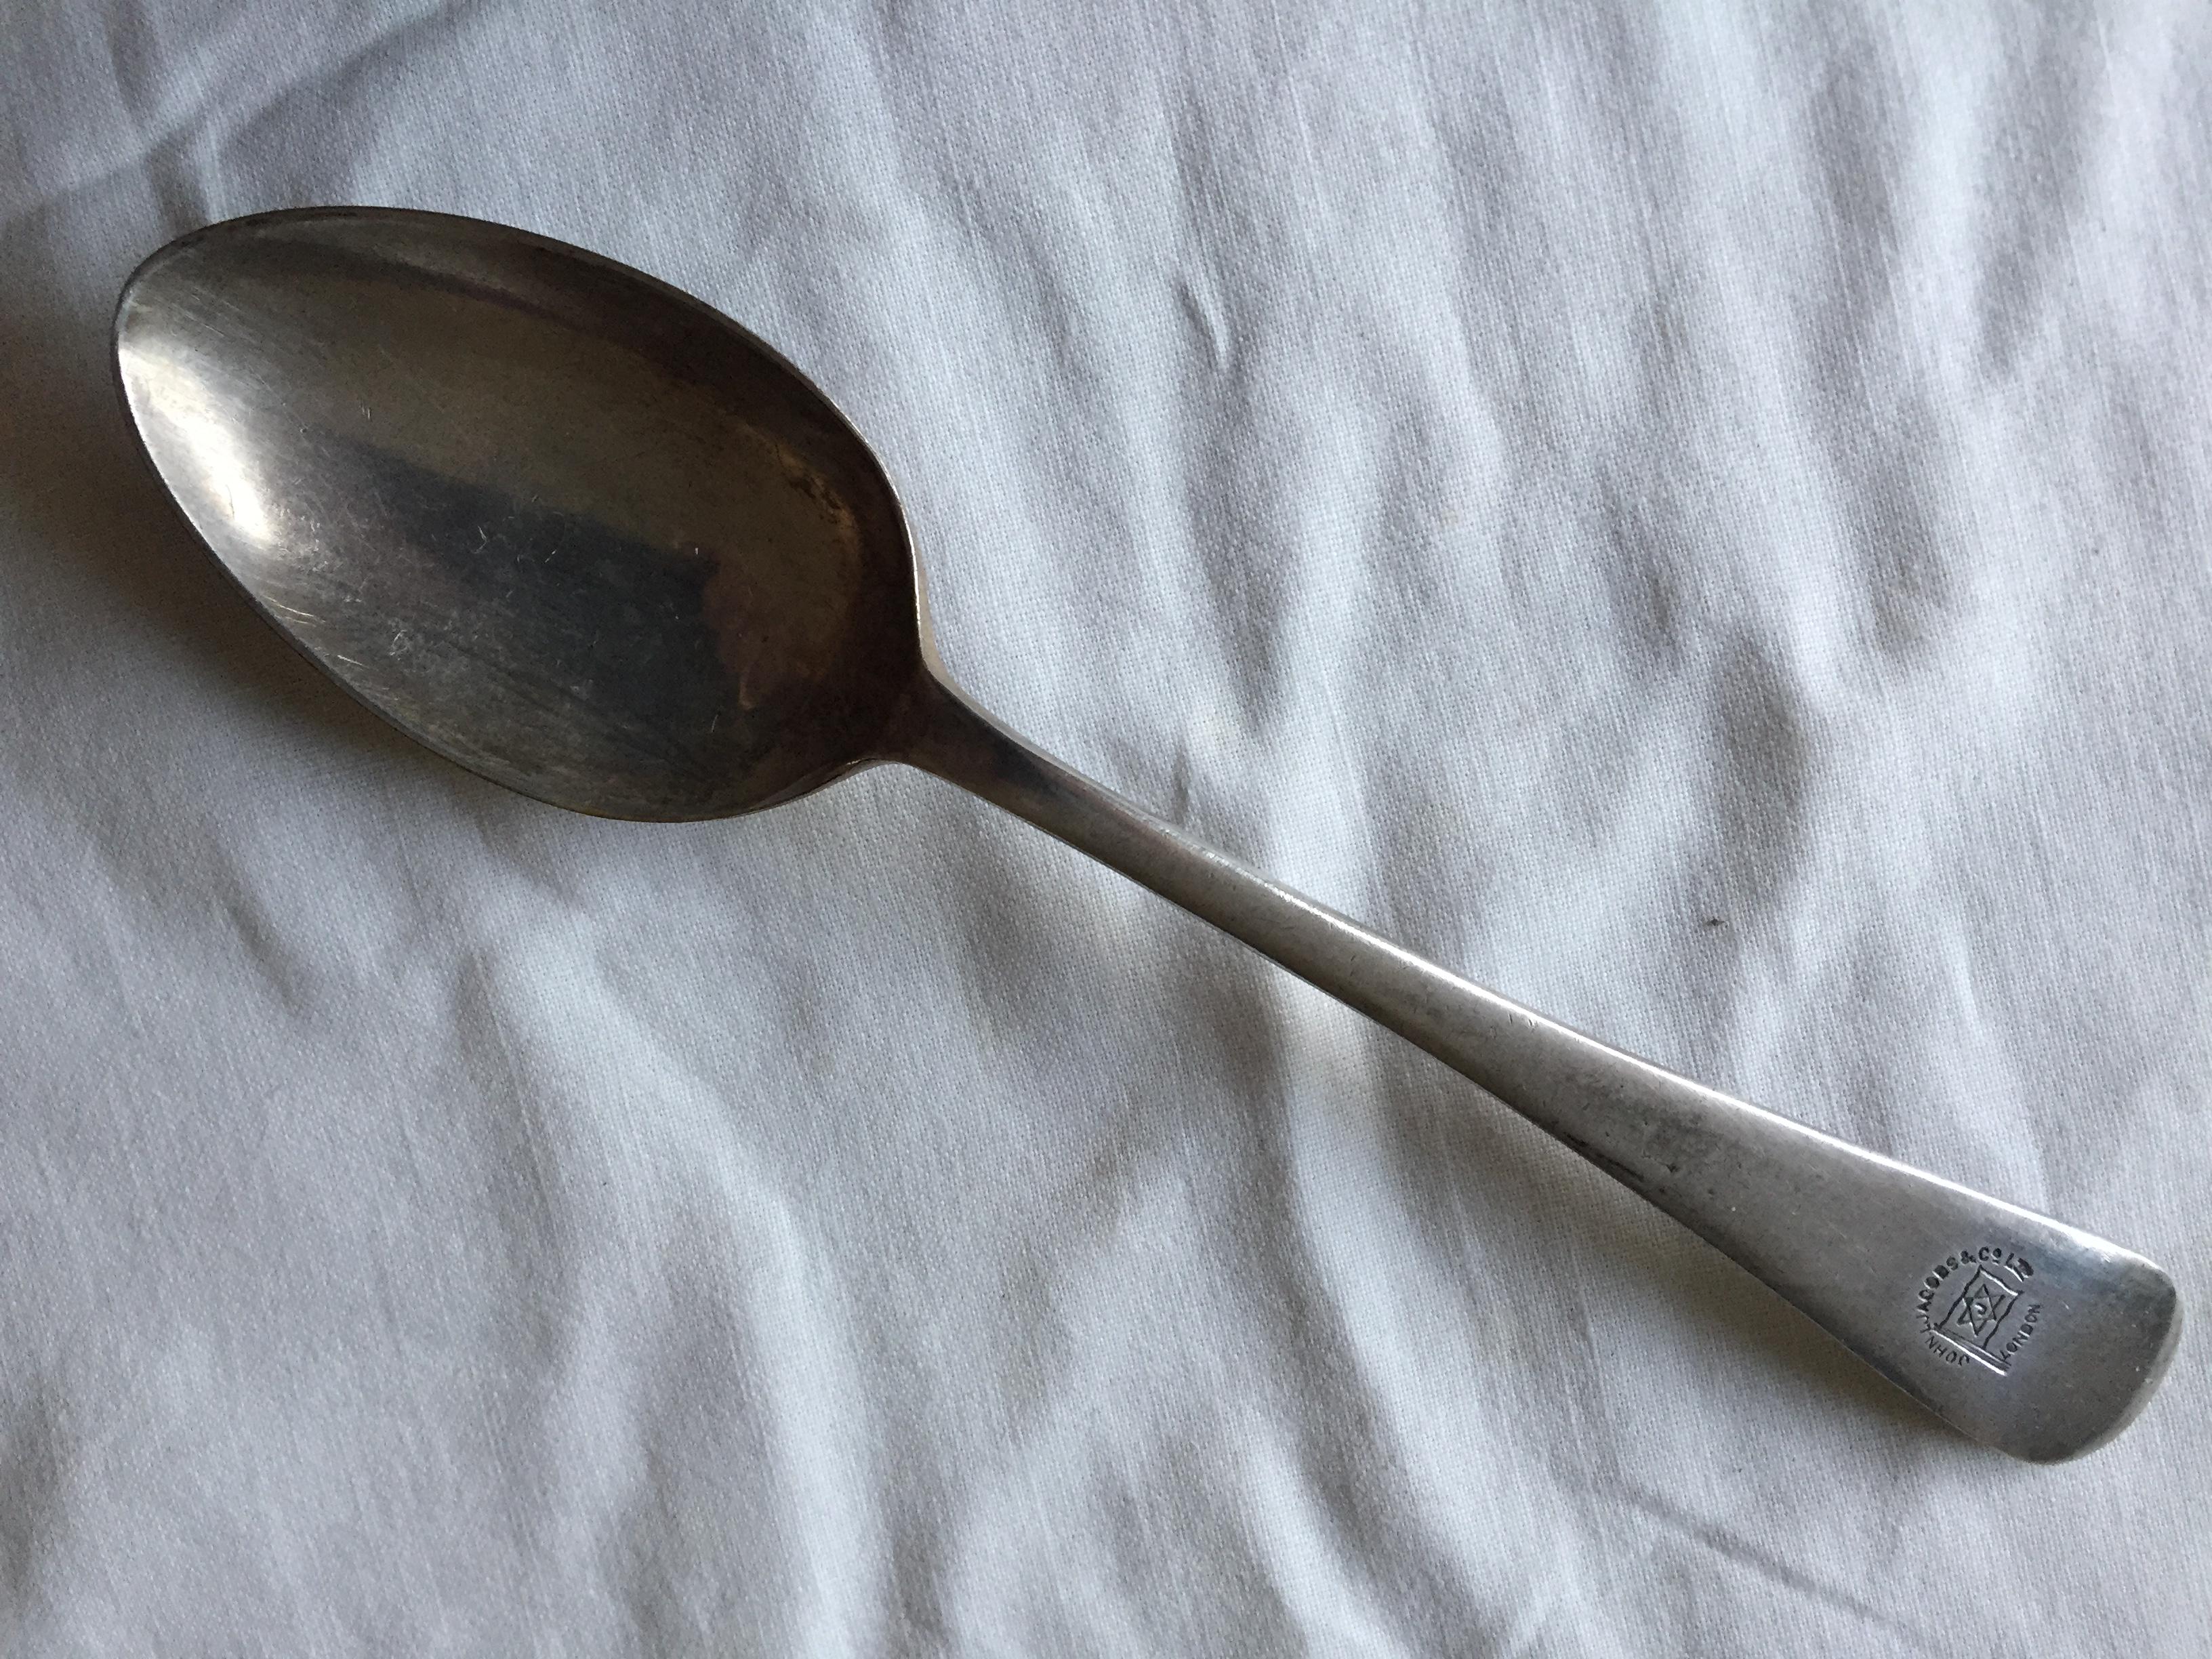 AS USED ON BOARD DESSERT SPOON FROM THE JOHN JACOBS LINE